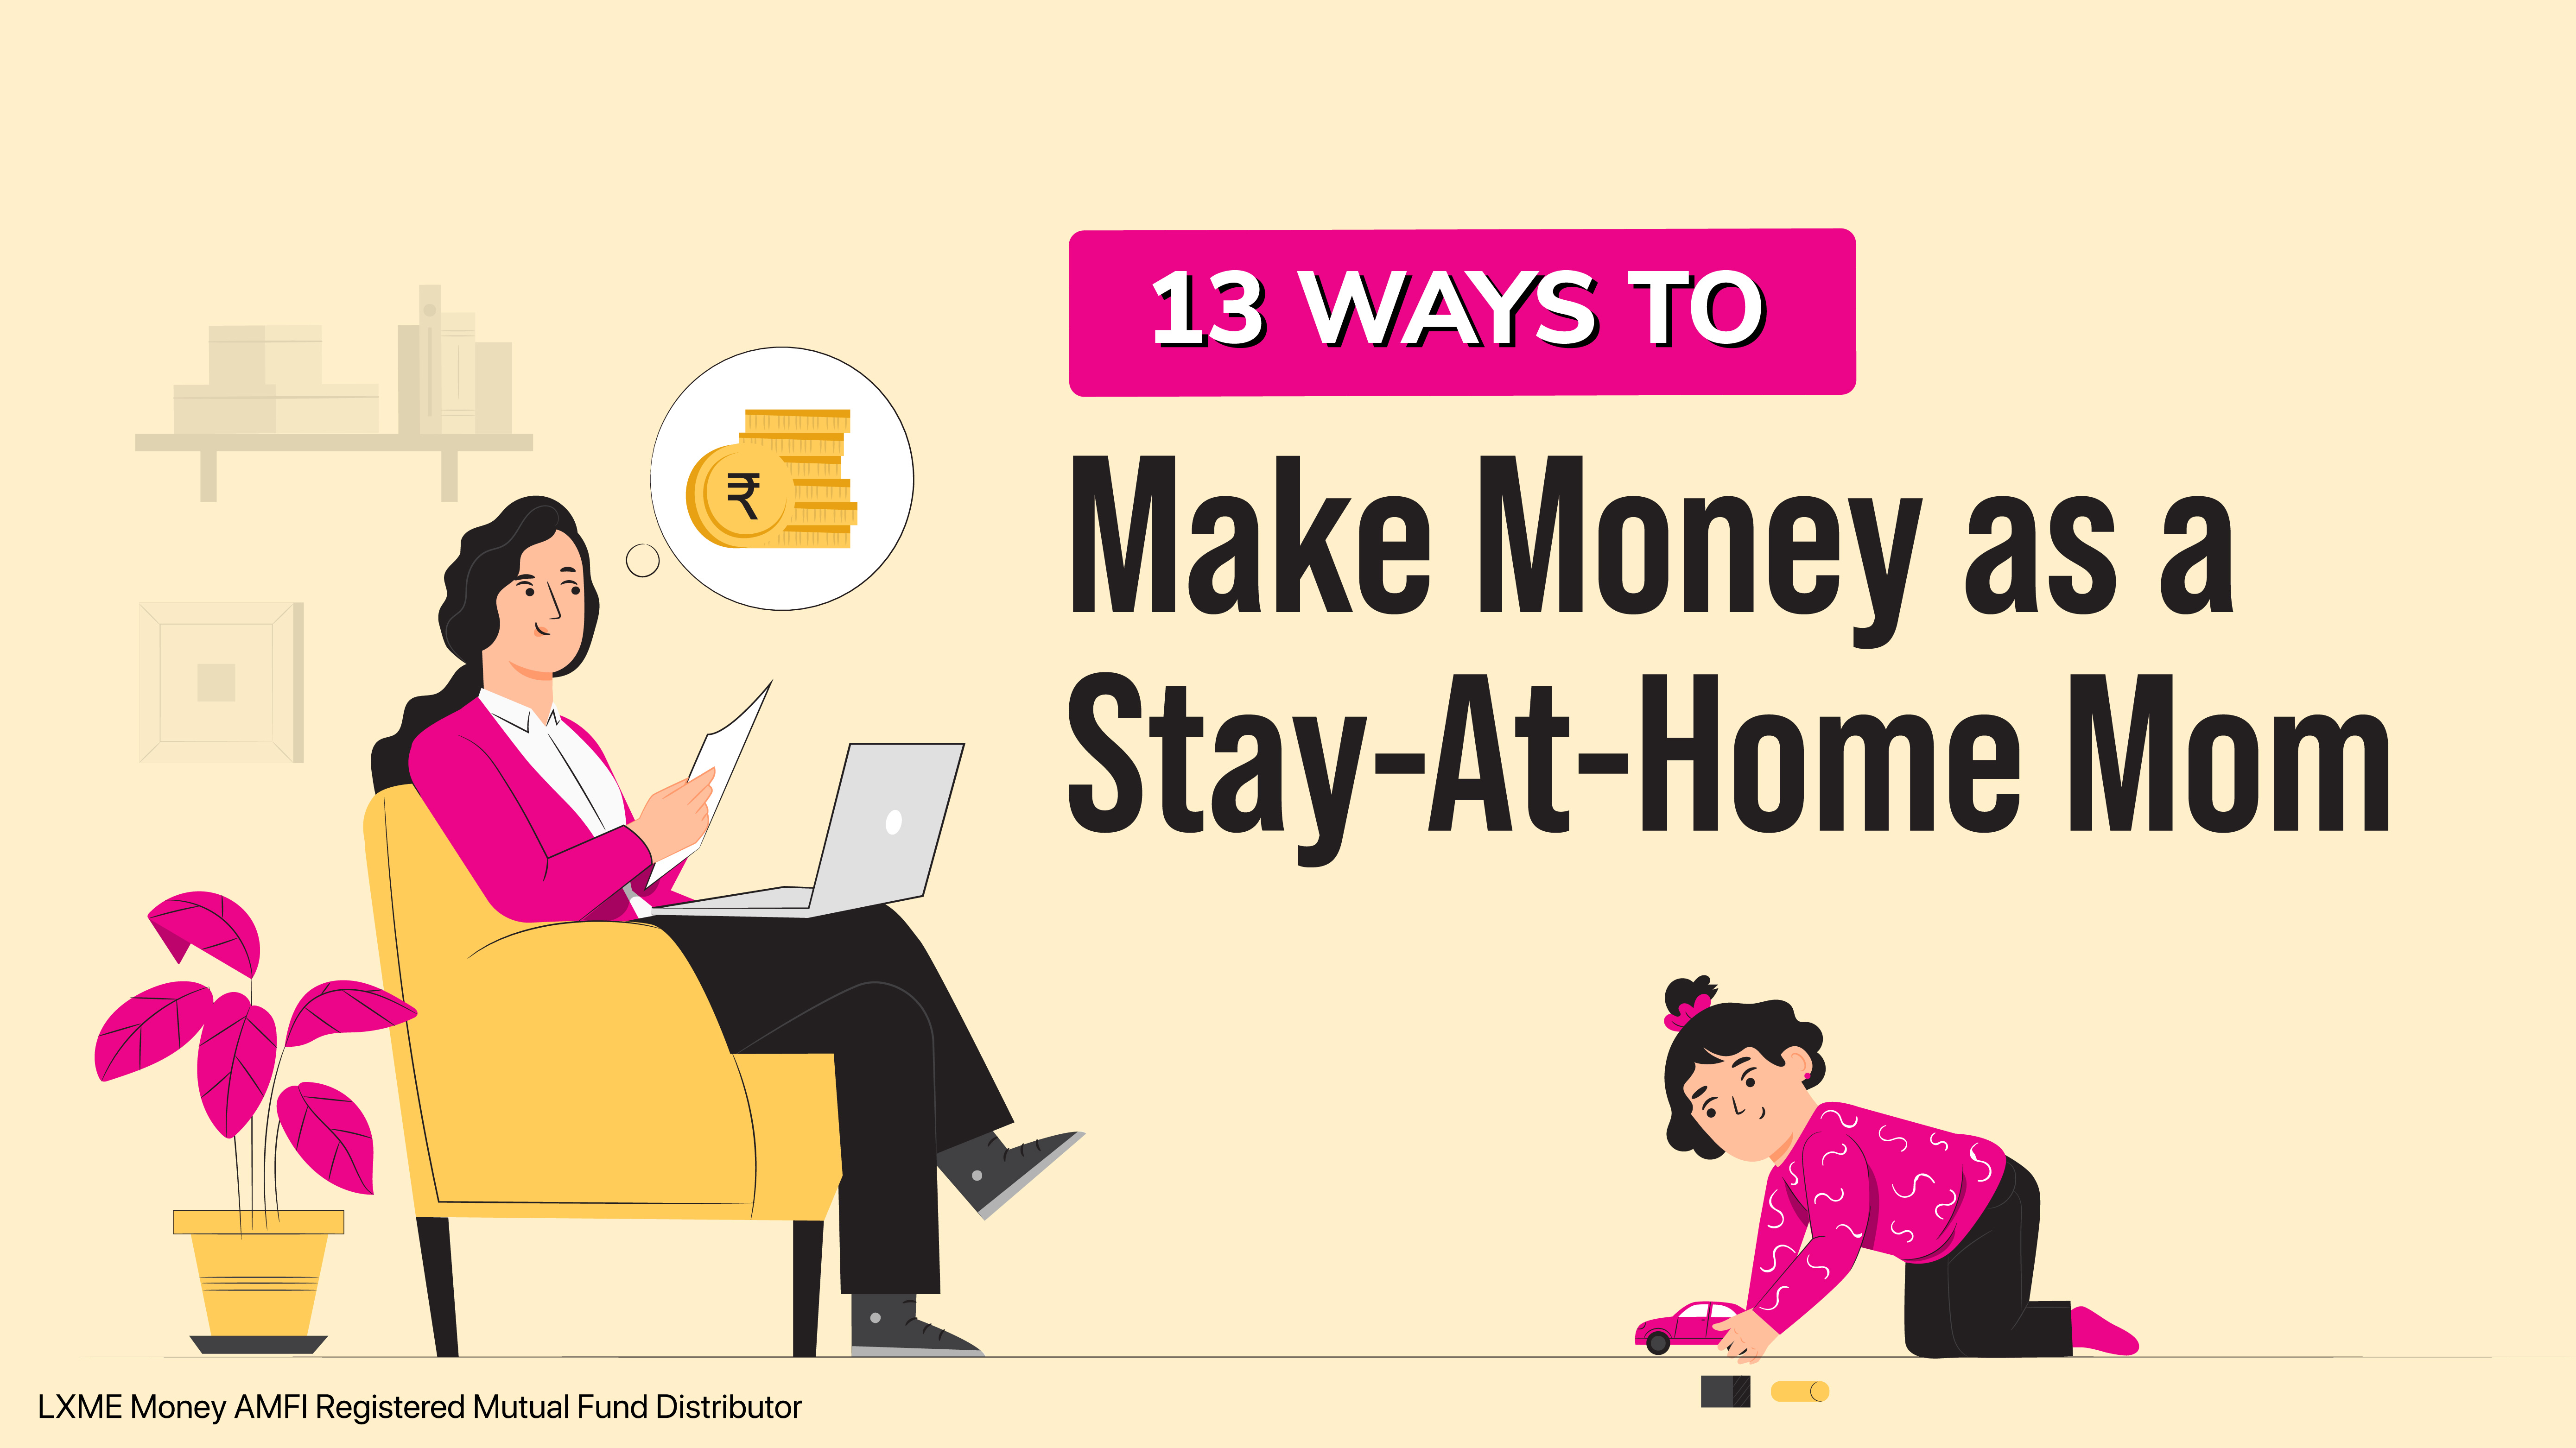 Ways to Make Money as a Stay-At-Home Mom